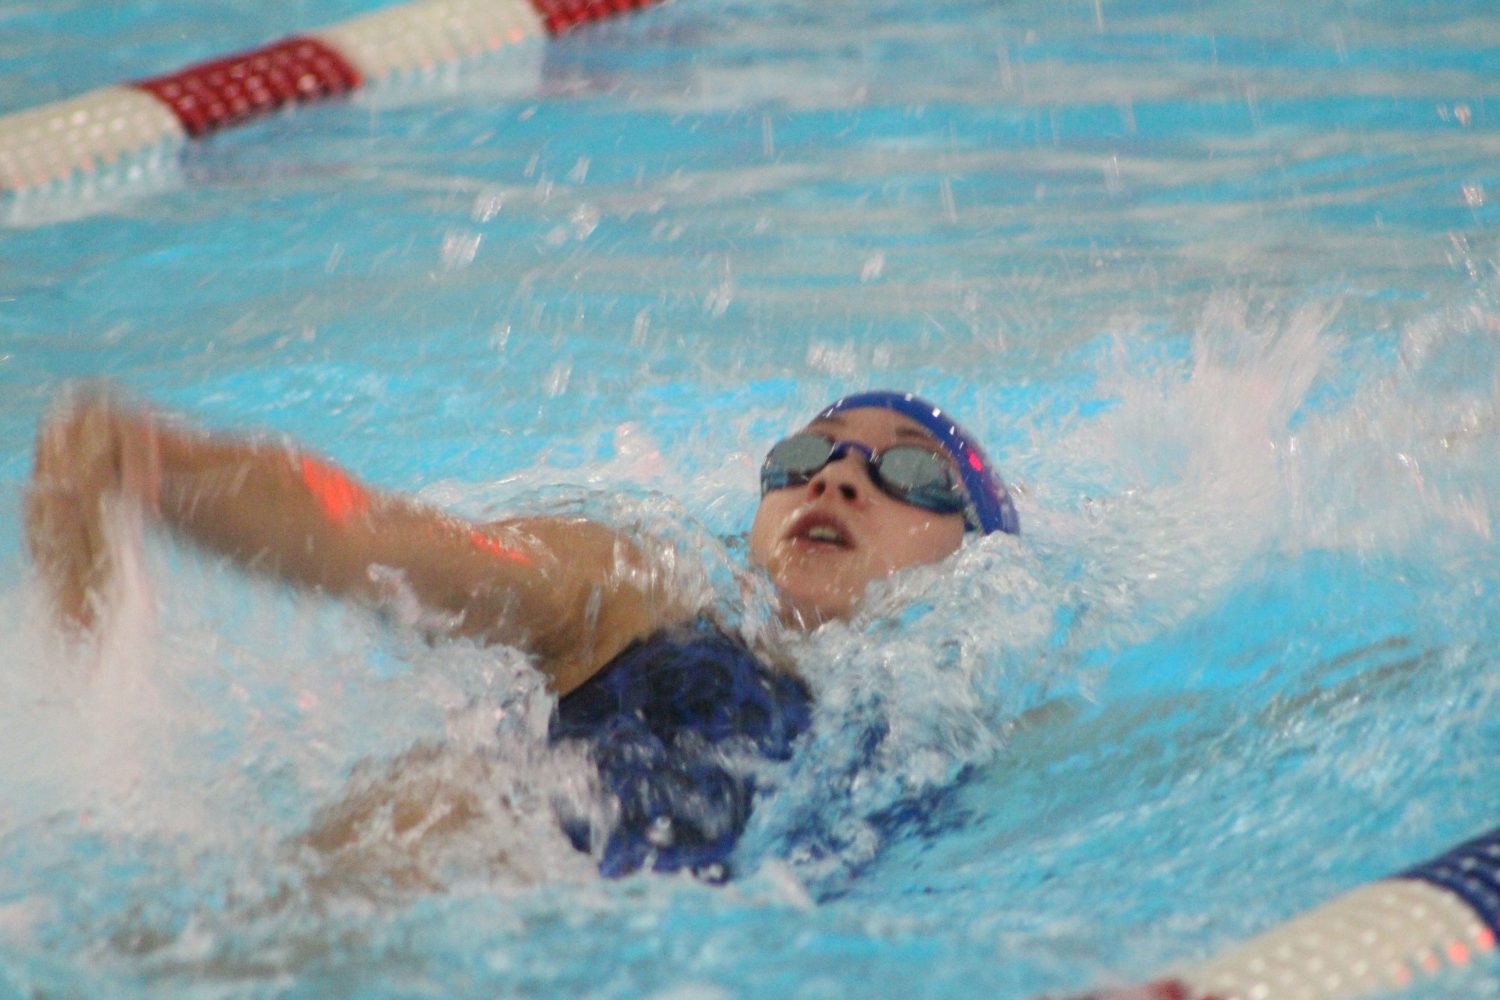 Record breaking night leads to dual meet win for Jays